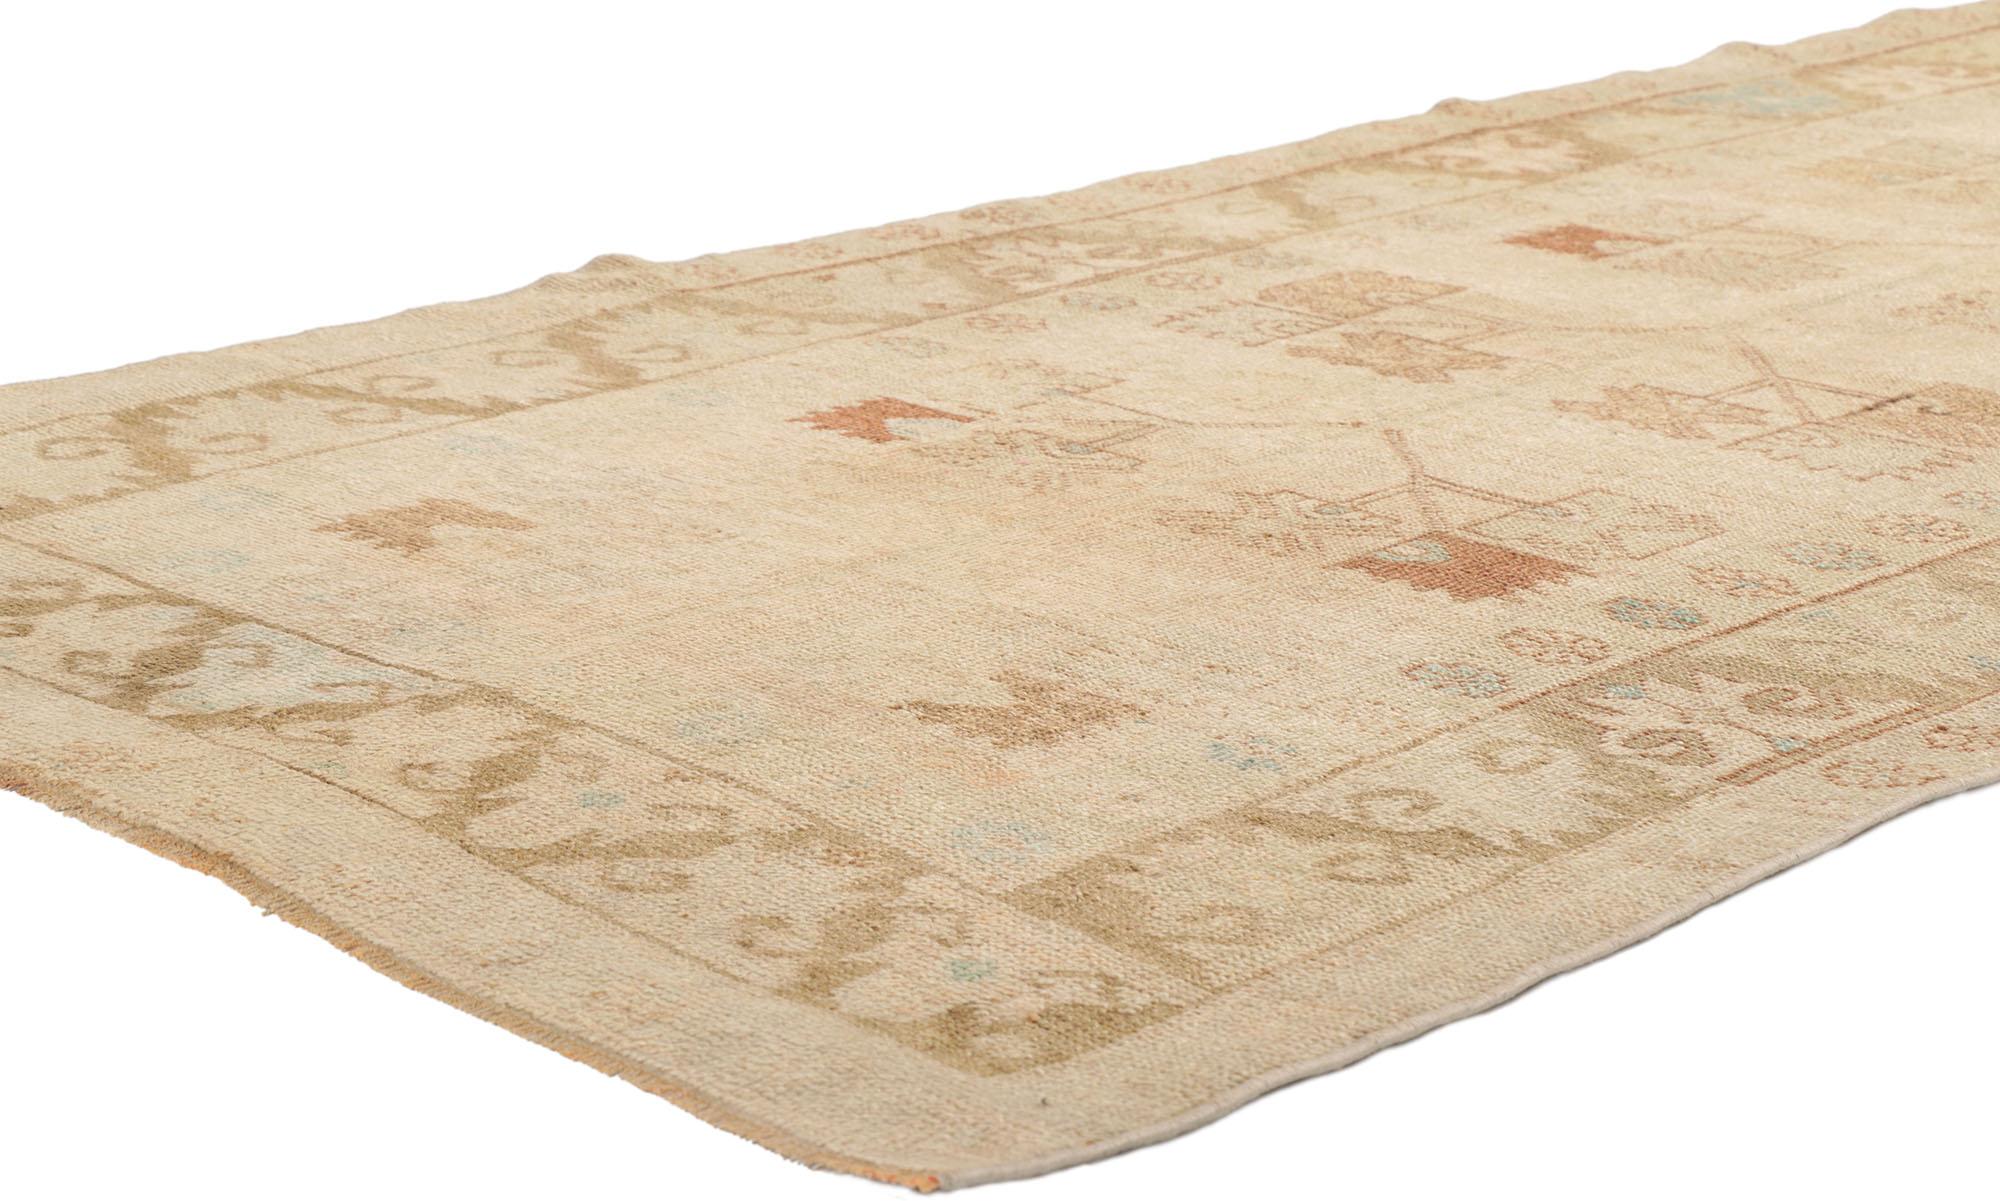 53704 Vintage Turkish Oushak Rug, 03'08 x 09'09.
​With a nod to Shubi and understated elegance, this hand knotted wool vintage Turkish Oushak rug is a masterclass in texture and detail. It's neutral earth-tone colors and geometric botanical shapes